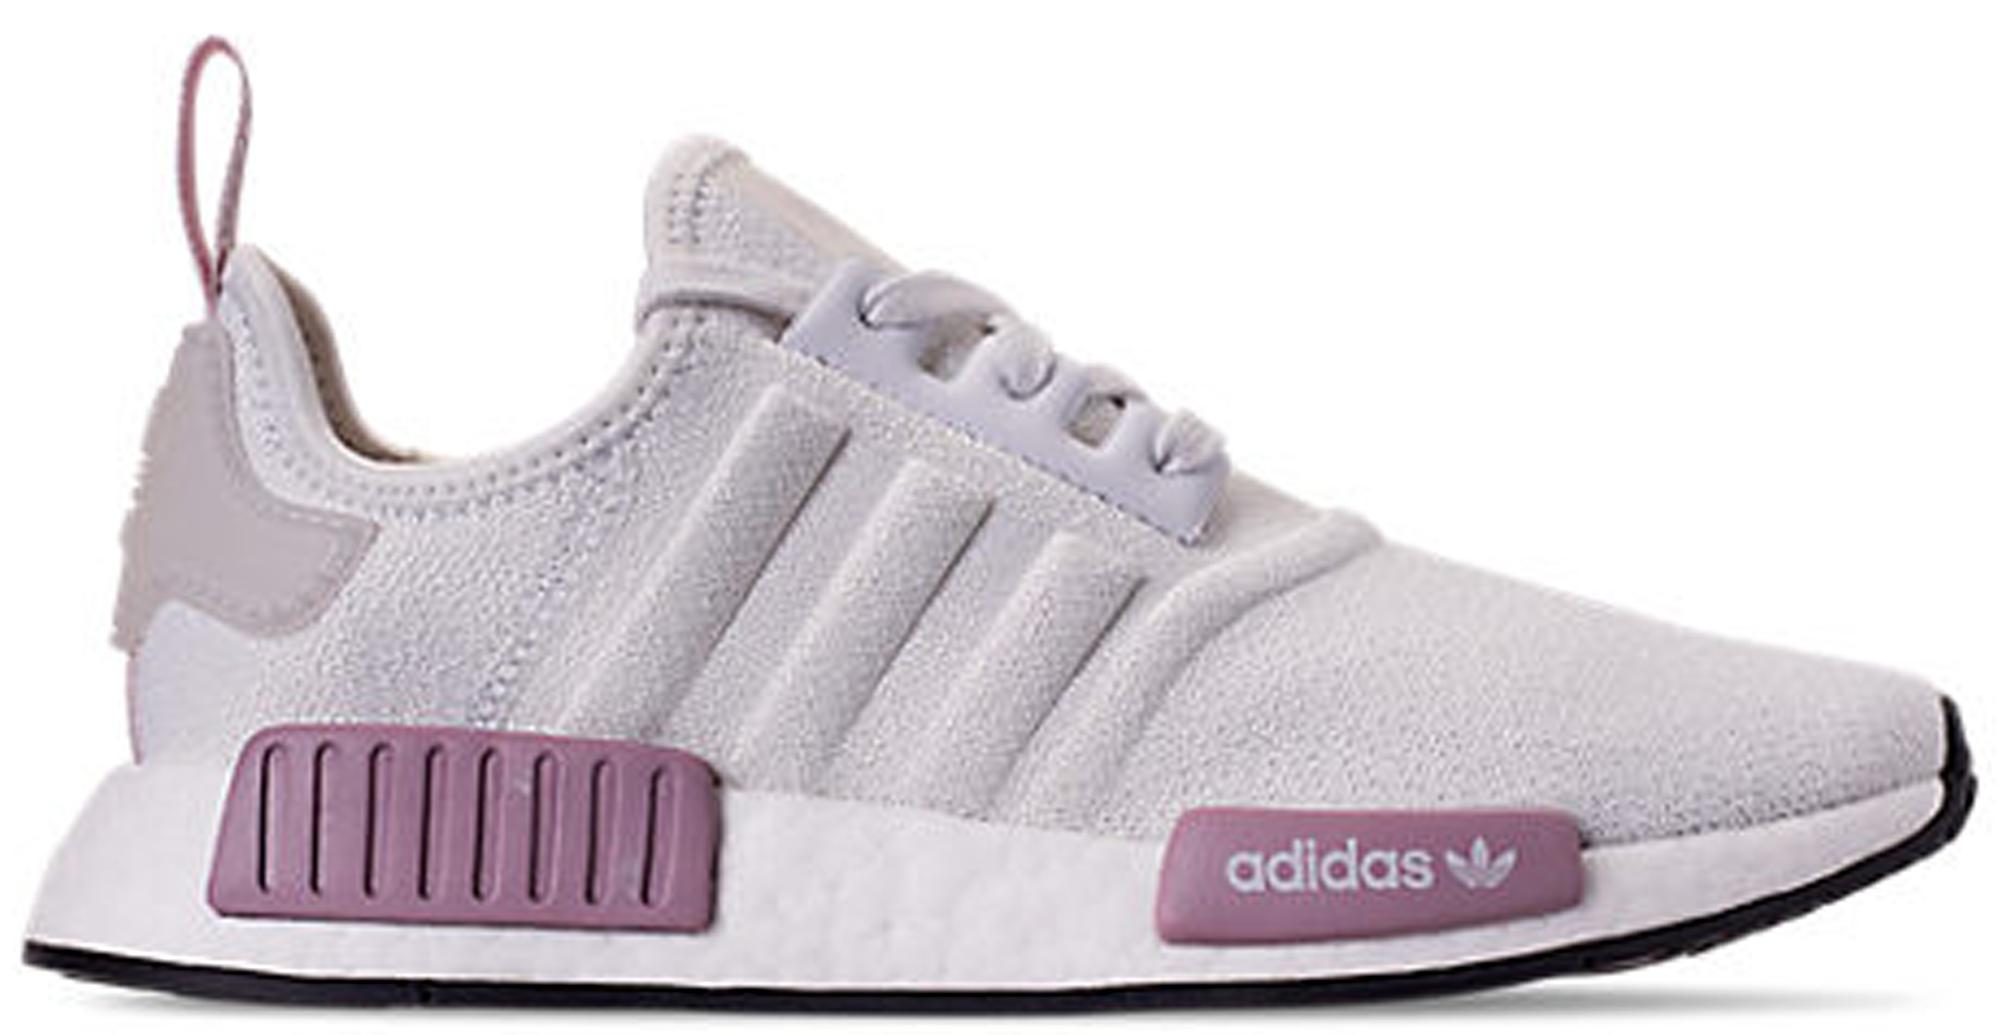 adidas nmd r1 cloud white orchid tint